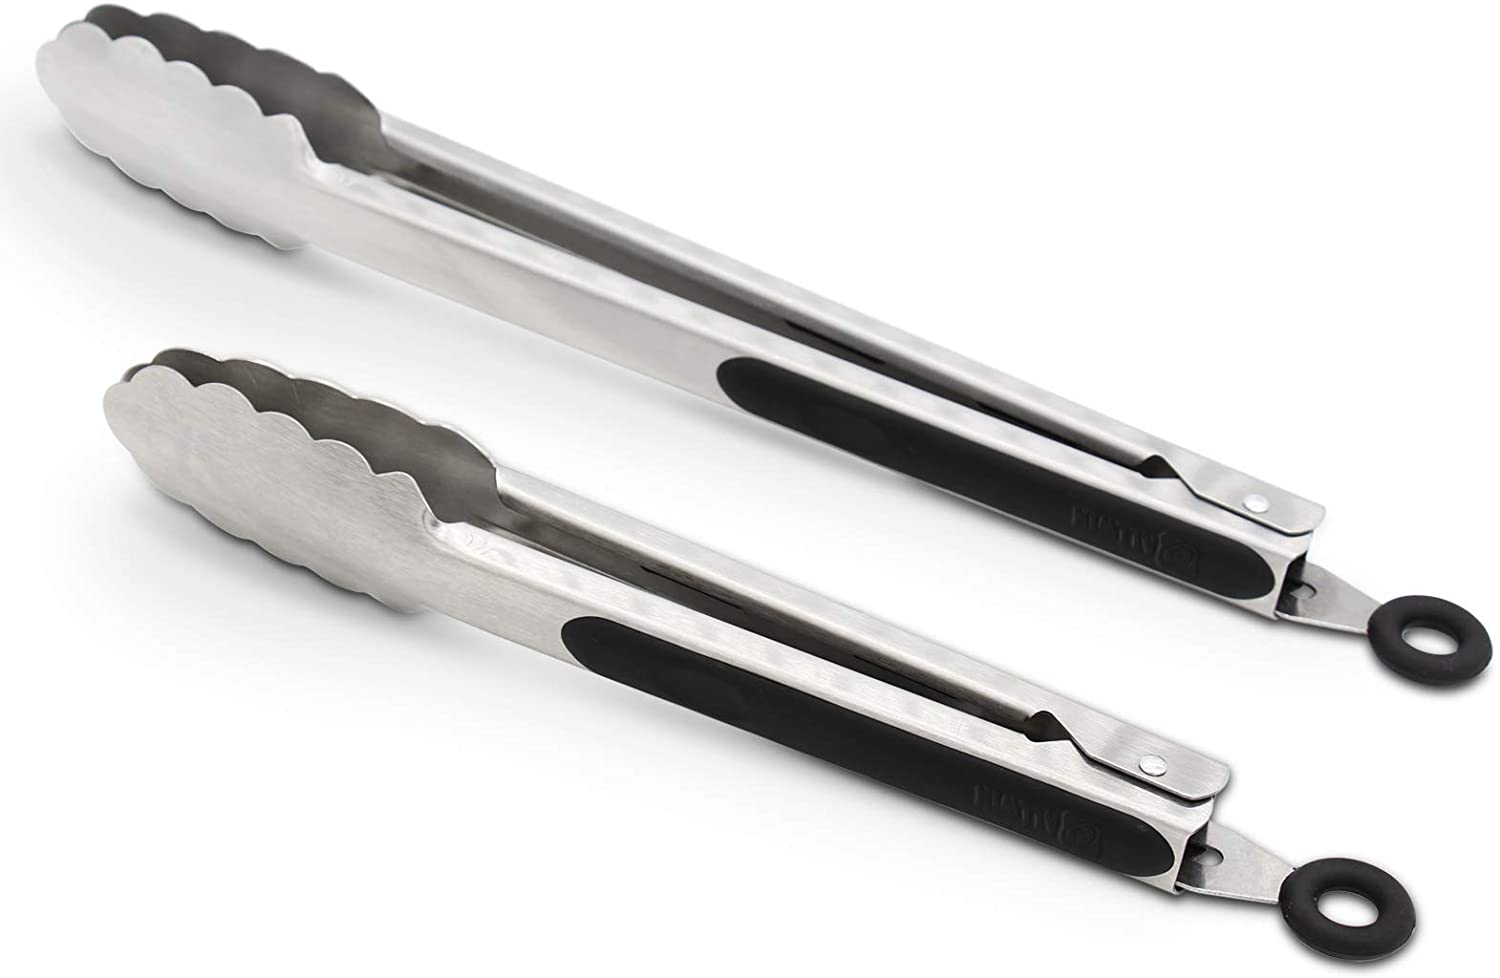 Allwin-Houseware 304 Stainless Steel Grill Tongs, 2-Pack